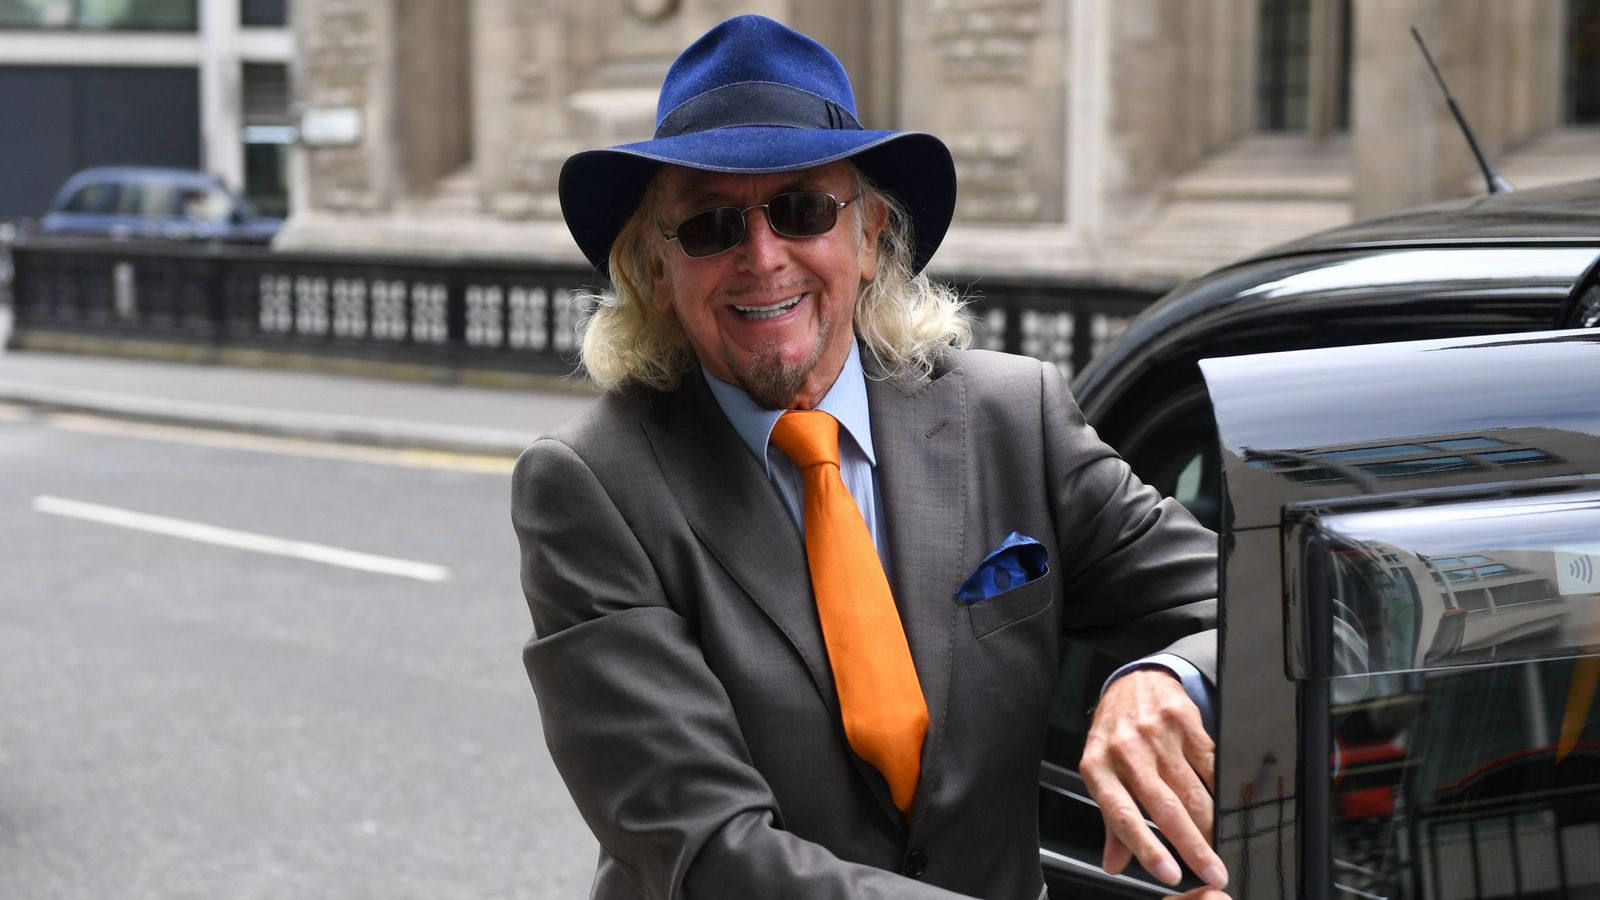 Owen Oyston due in court while Blackpool fans fear points penalty ...